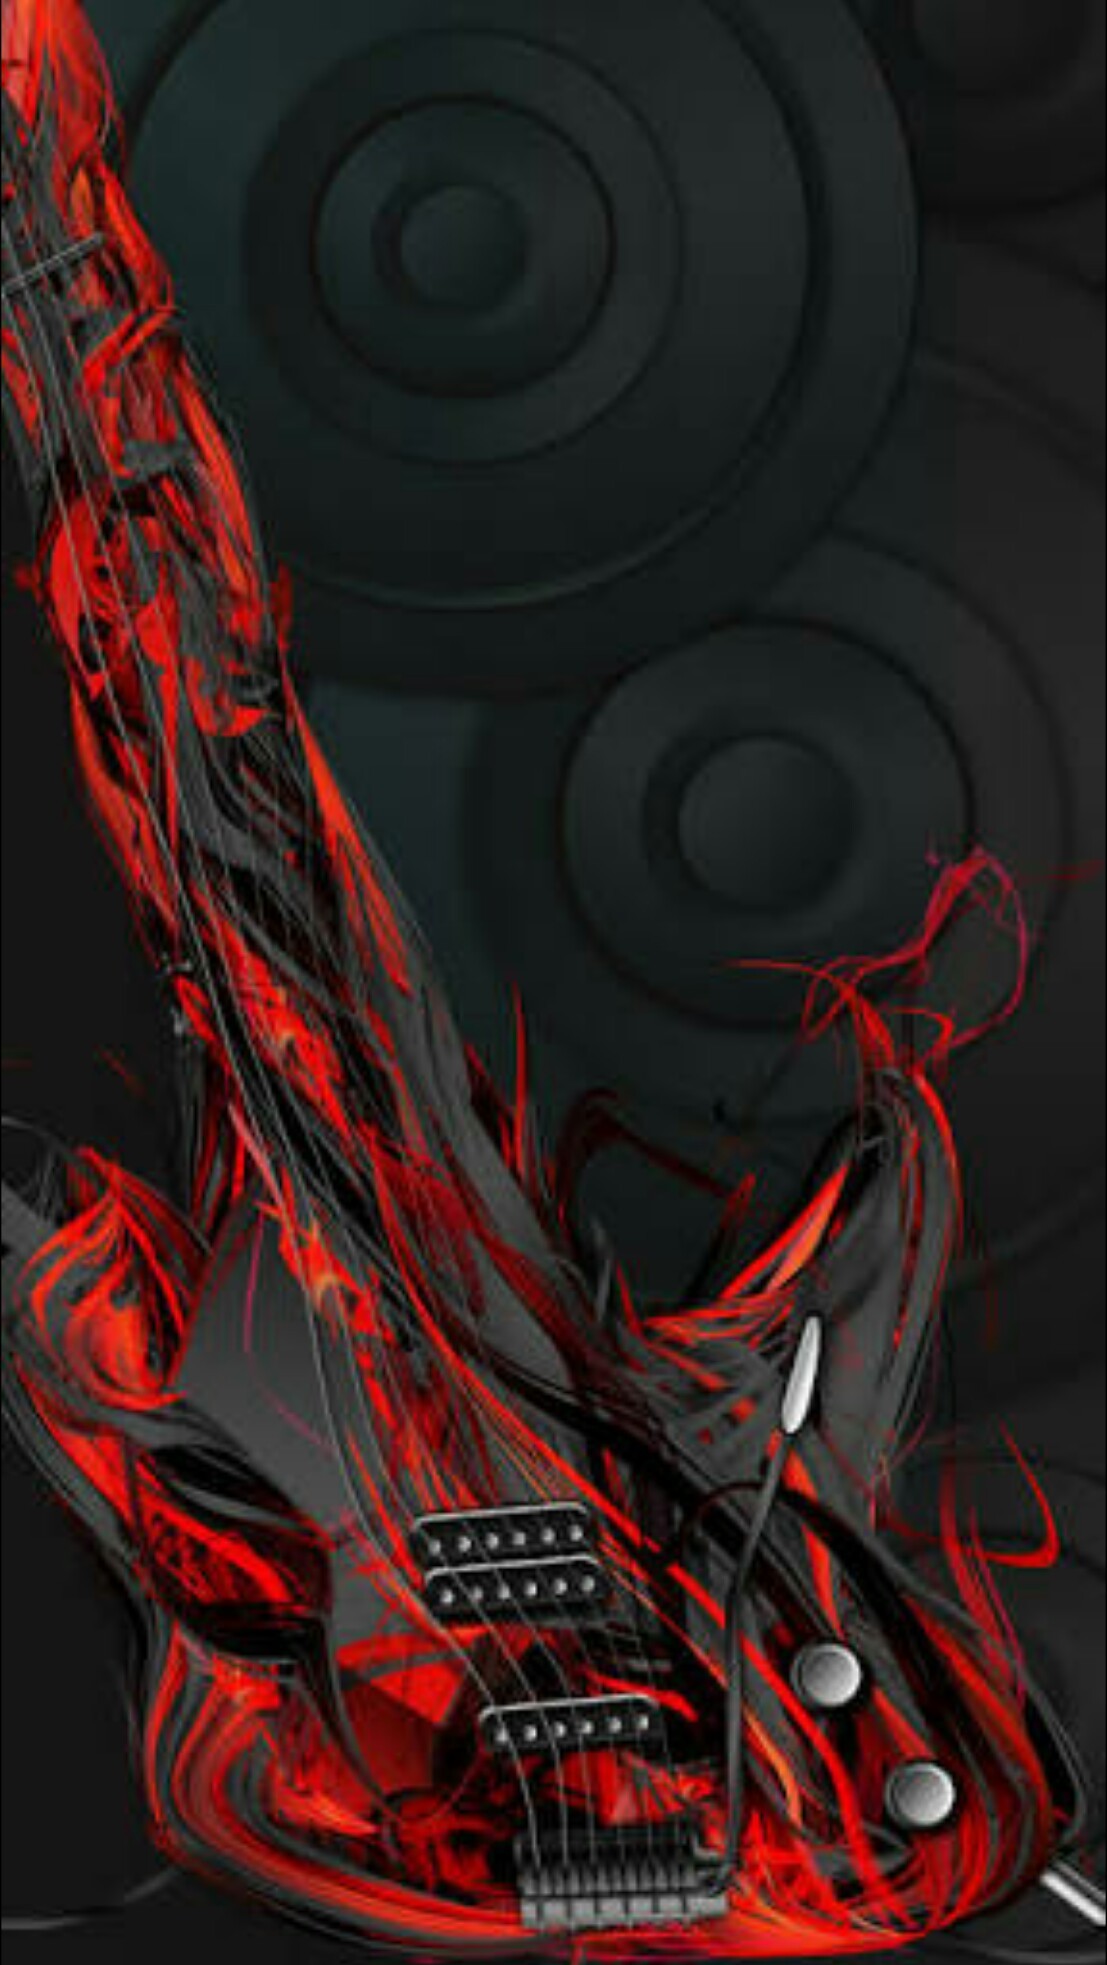 rock wallpaper iphone,red,fictional character,illustration,graphic design,cg artwork